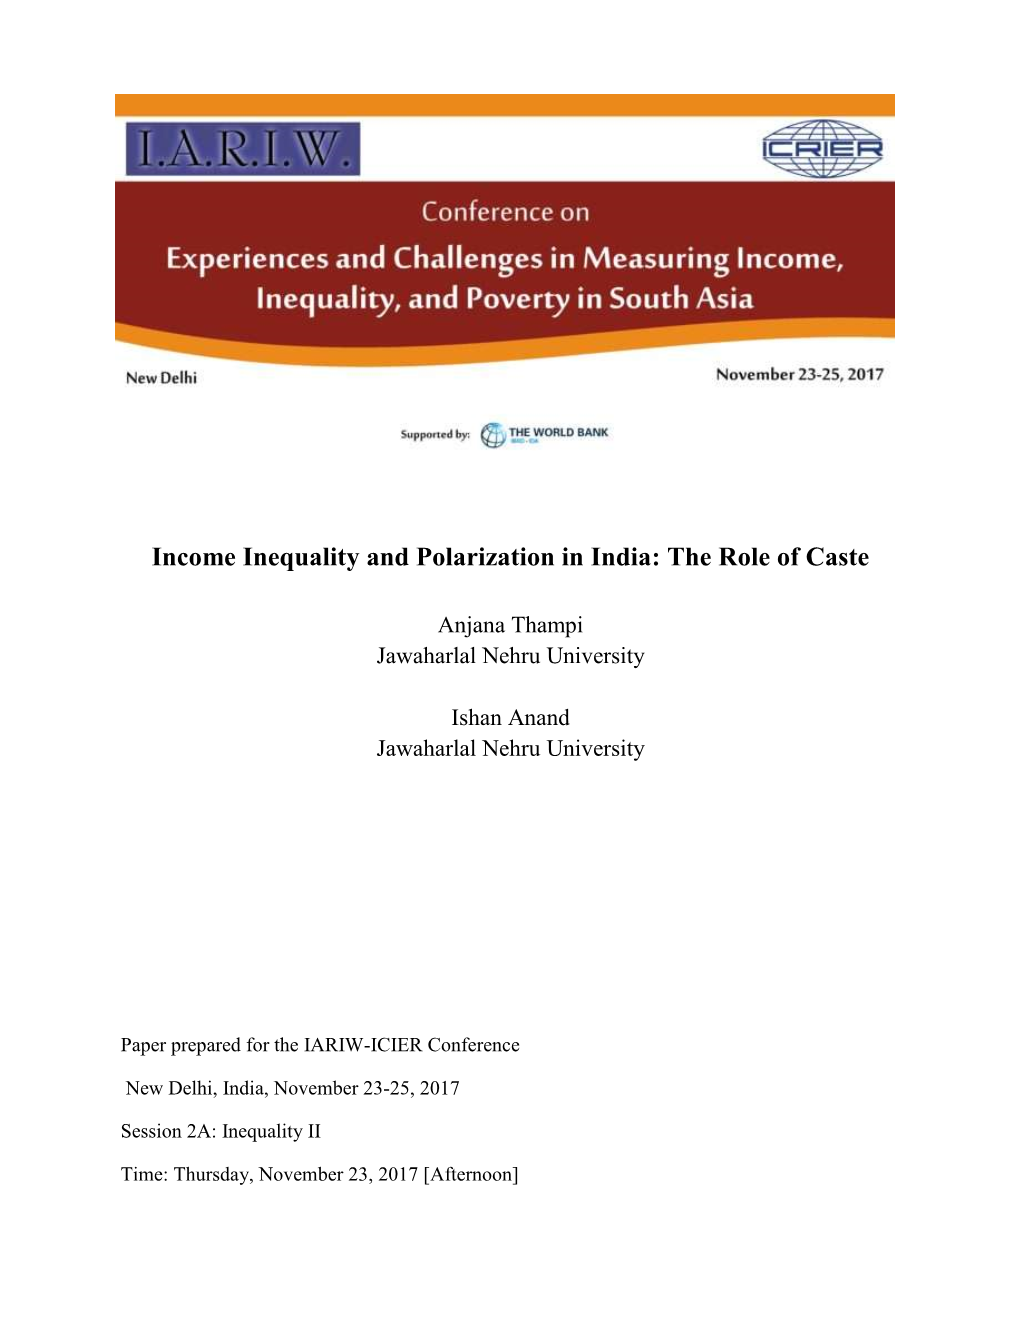 Income Inequality and Polarization in India: the Role of Caste